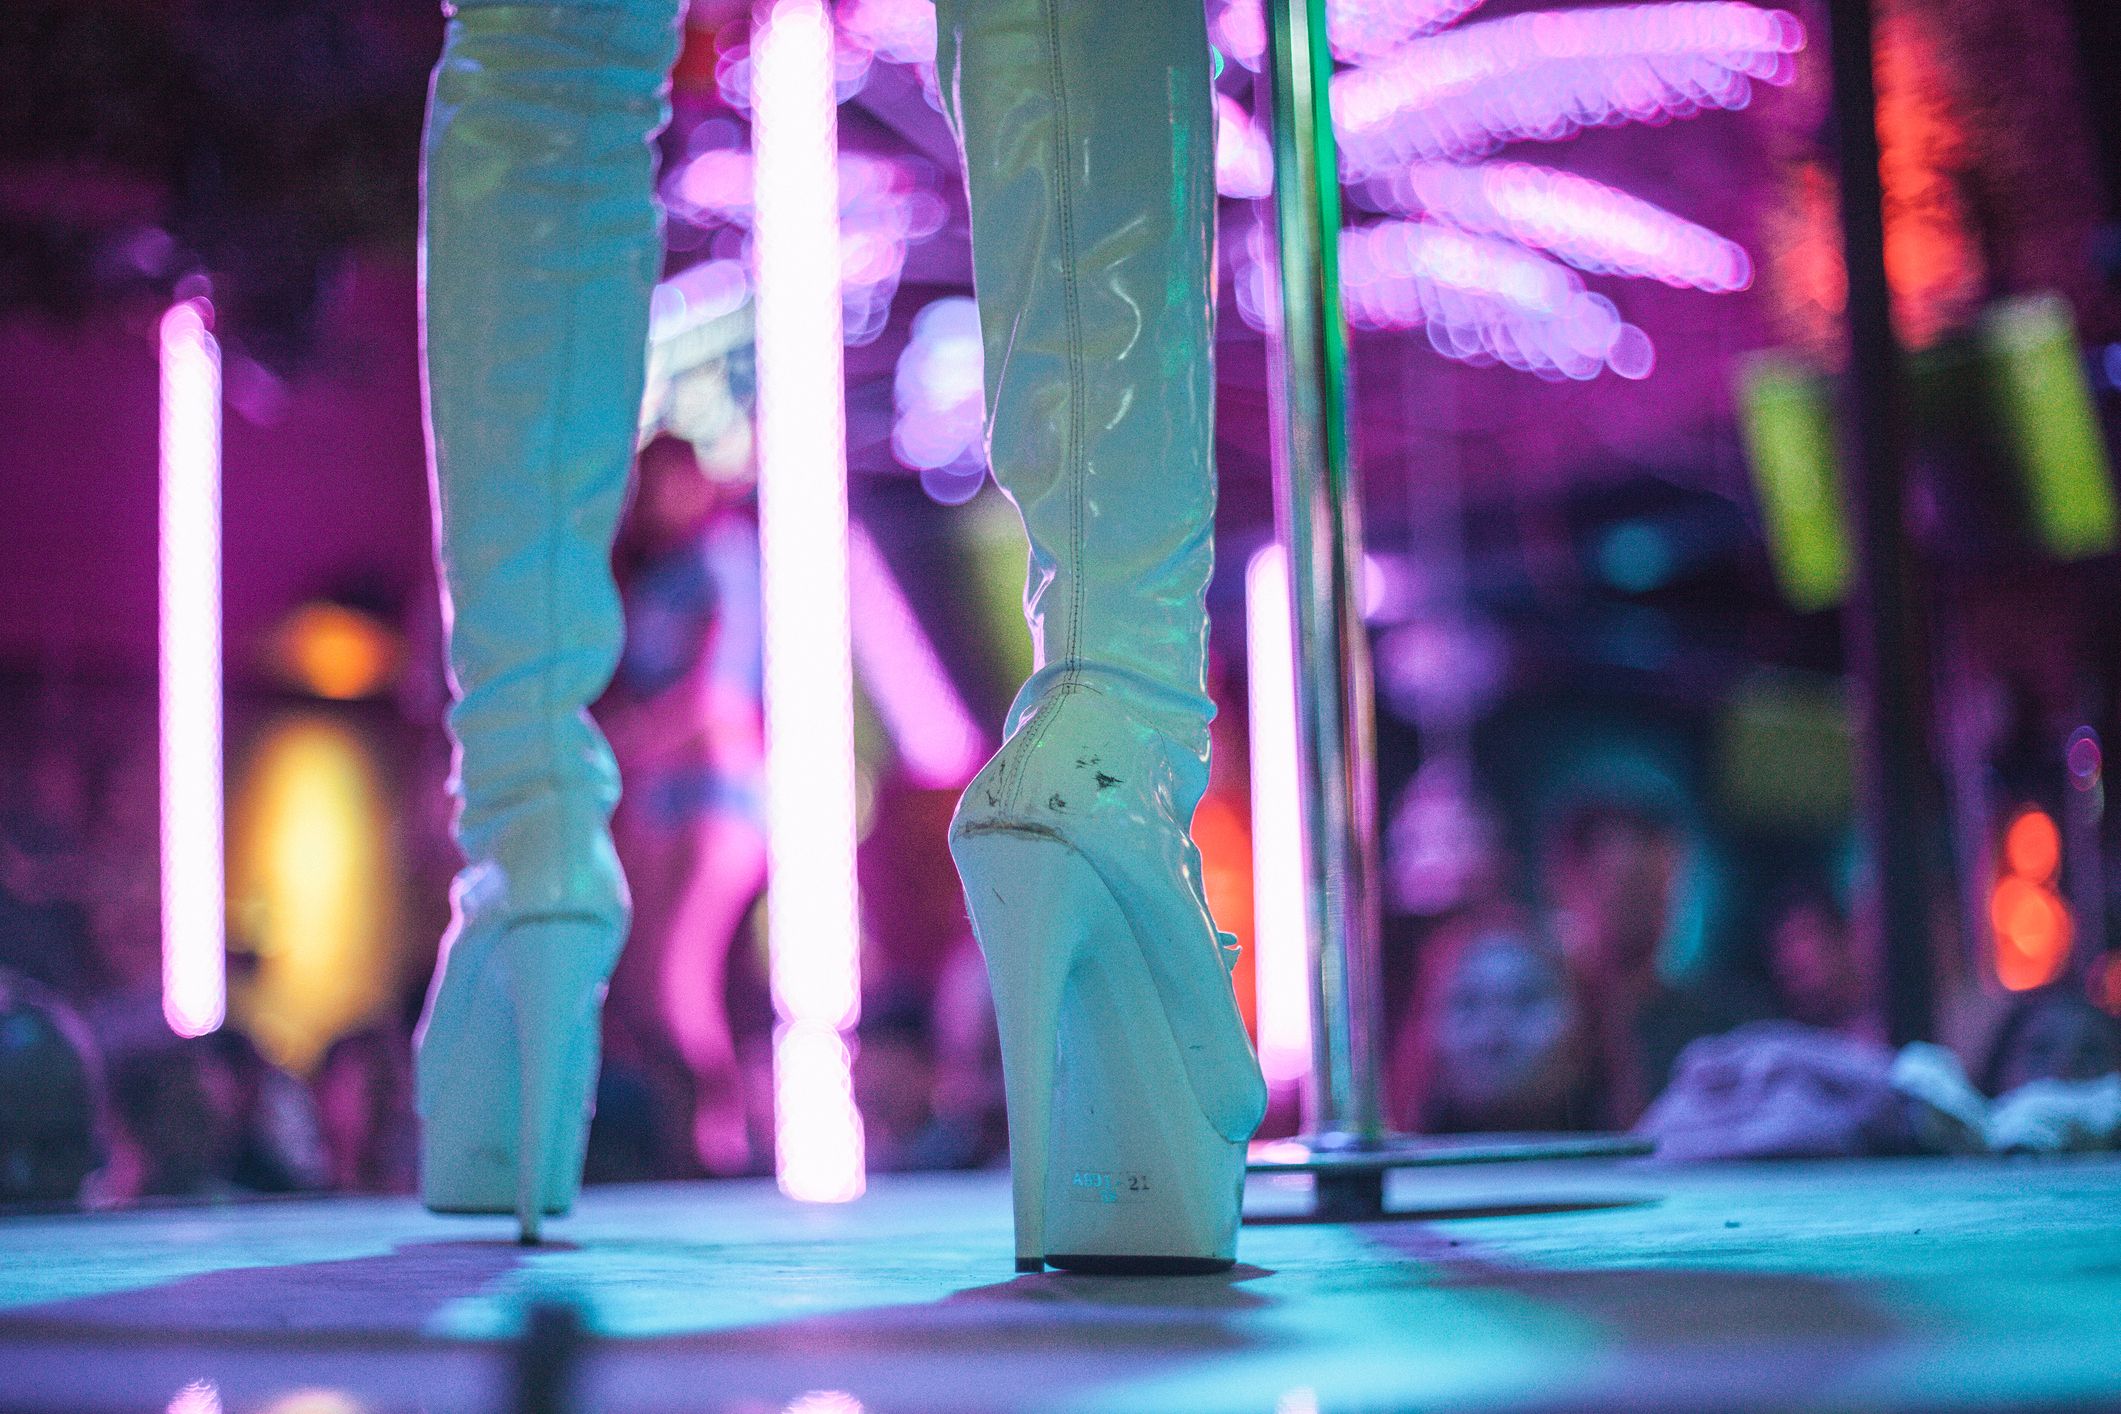 Strippers Reveal the Three Things All Strip Club Customers Should Know